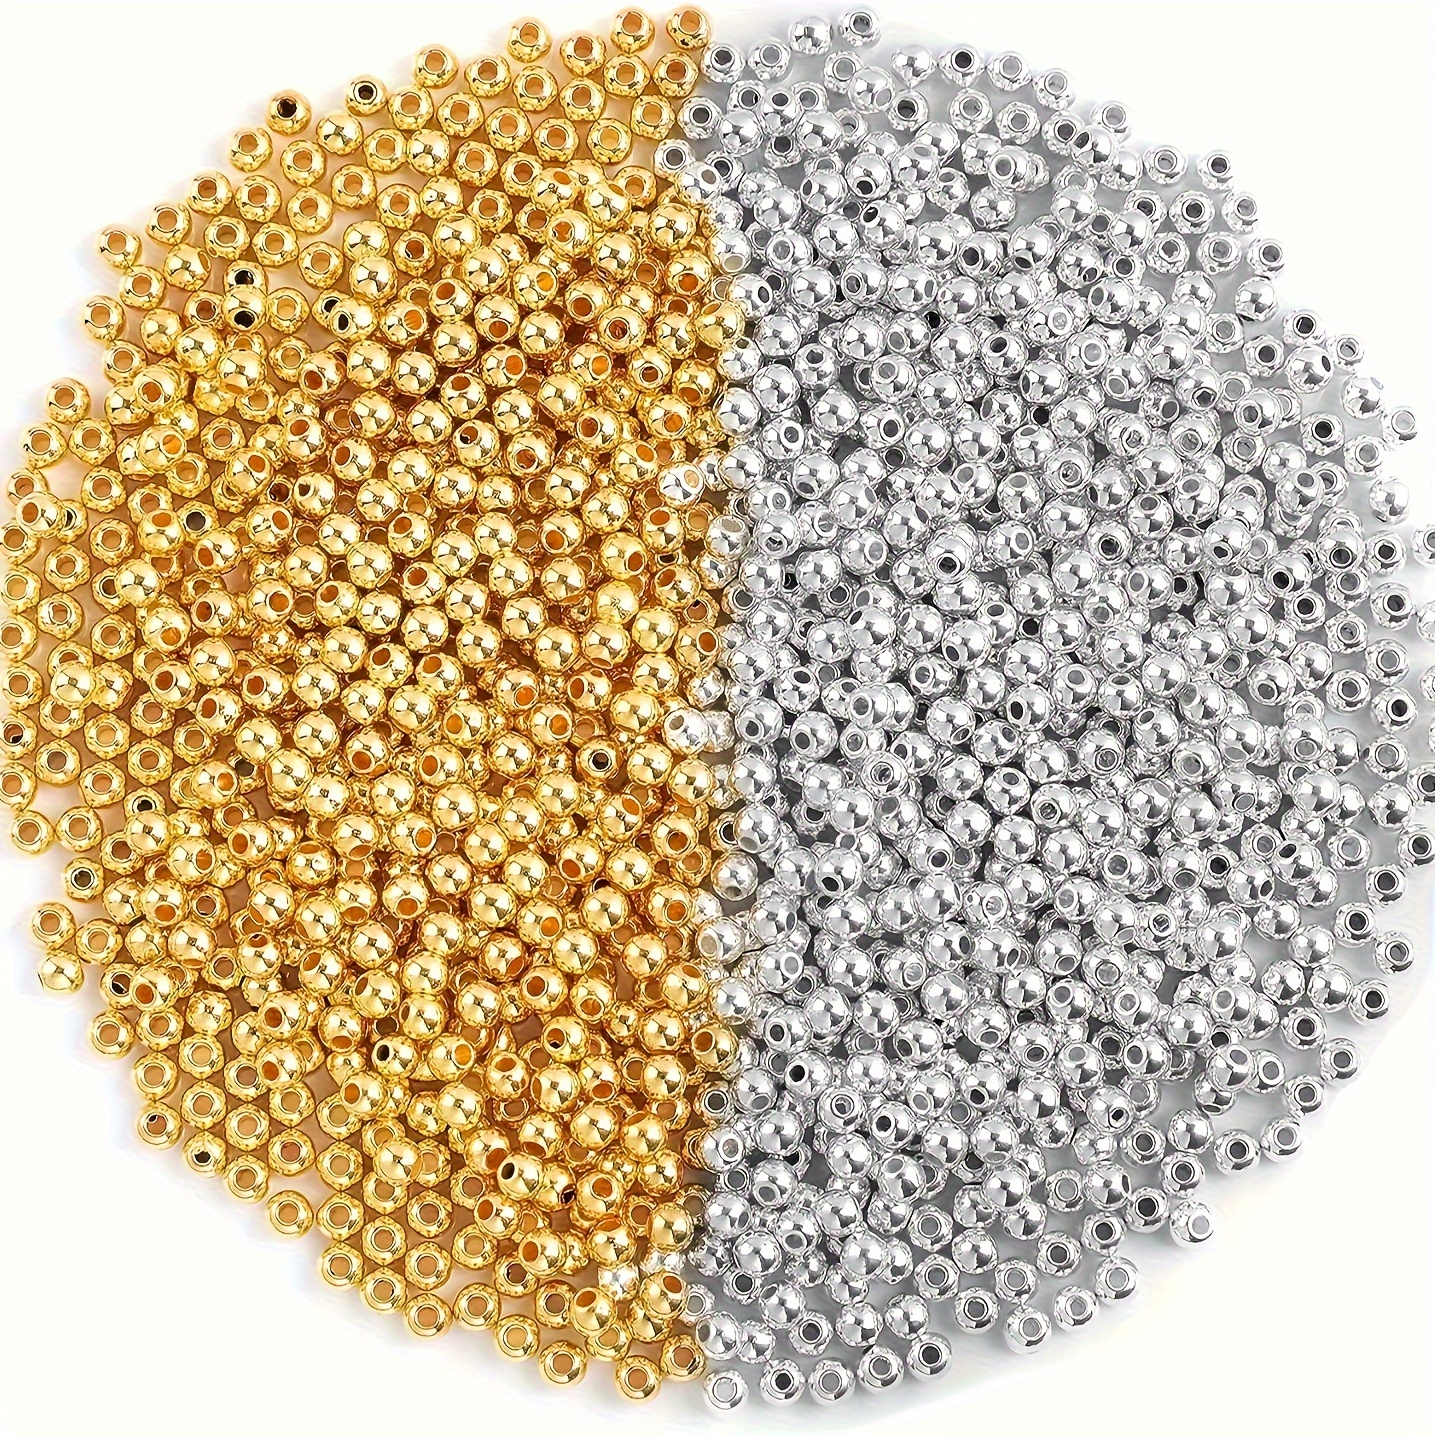 

1200pcs Golden And Slivery Resin Round Beads, 4mm Round Spacer Beads, Loose Beads, For Diy Bracelets, Necklaces, Jewelry Making Accessories